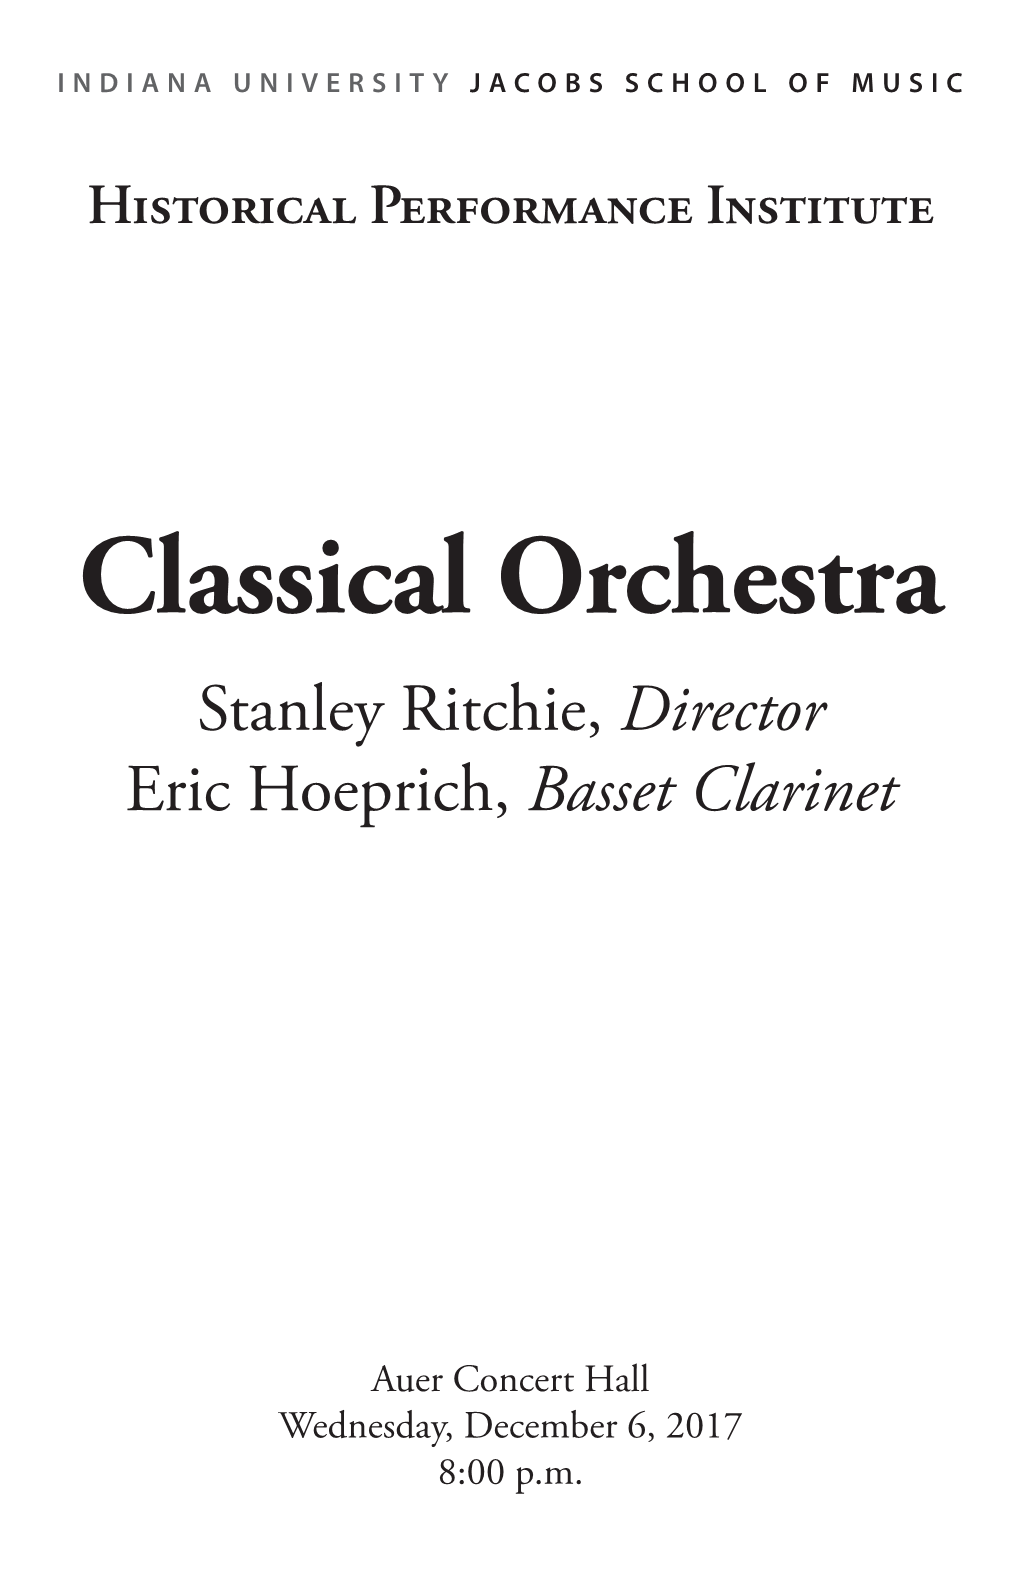 Classical Orchestra Stanley Ritchie, Director Eric Hoeprich, Basset Clarinet